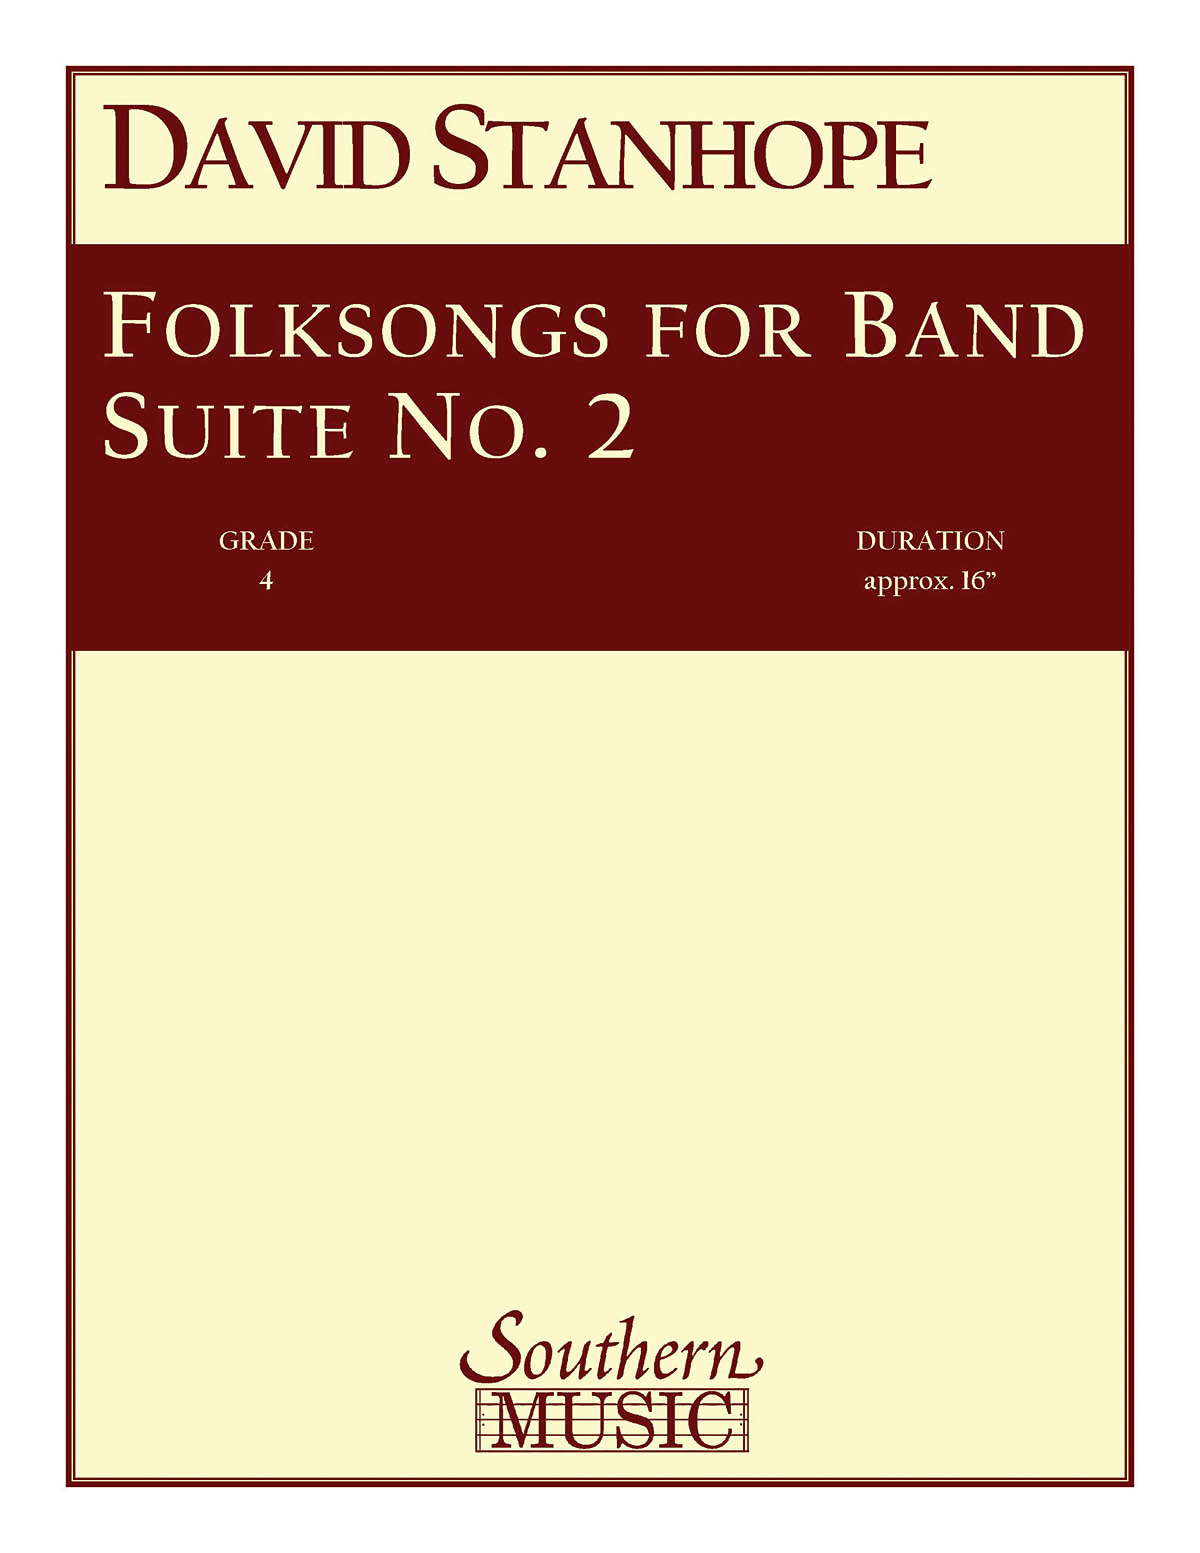 Folksongs For Band Suite 2